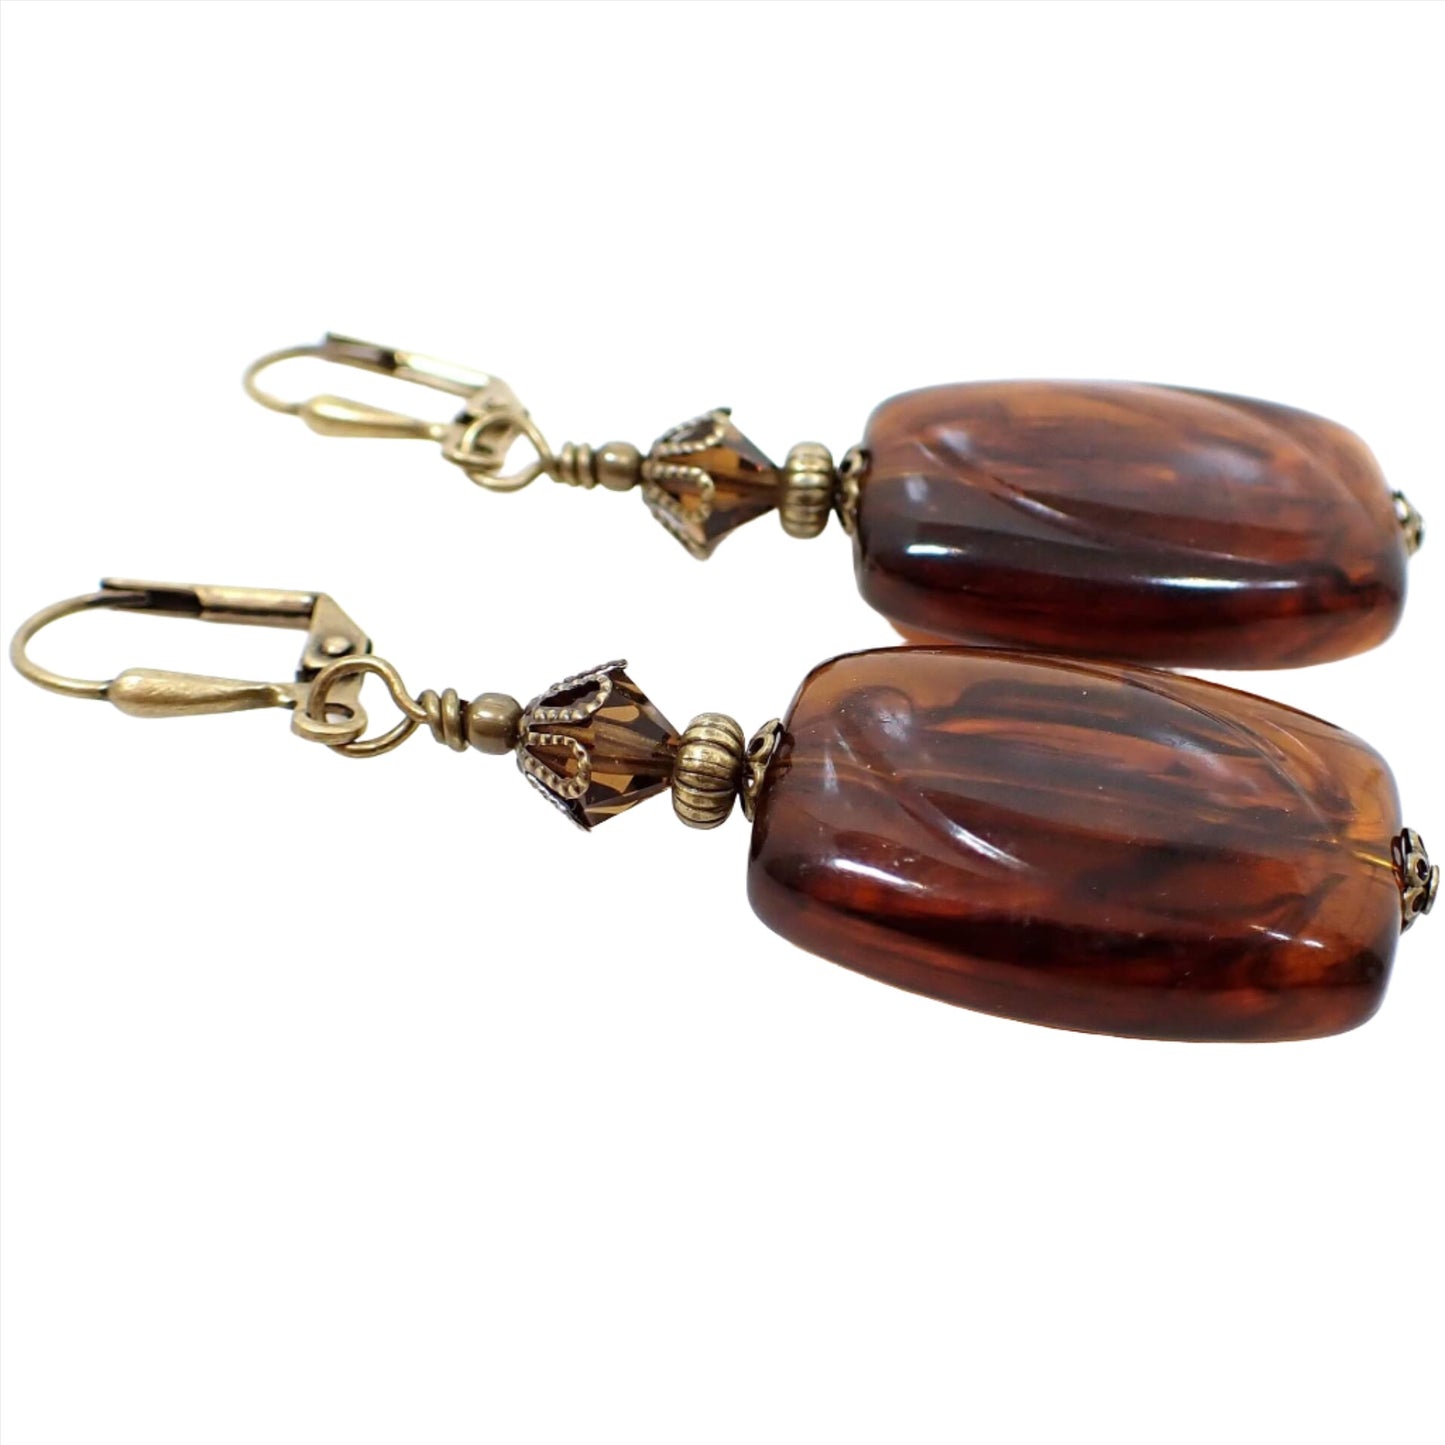 Side view of the handmade faux tortoise drop earrings. The metal is antiqued brass in color. There are faceted brown glass crystals at the top. The bottom beads are rectangle in shape with rounded edges and have an imitation tortoise design of marbled brown and black colors. 